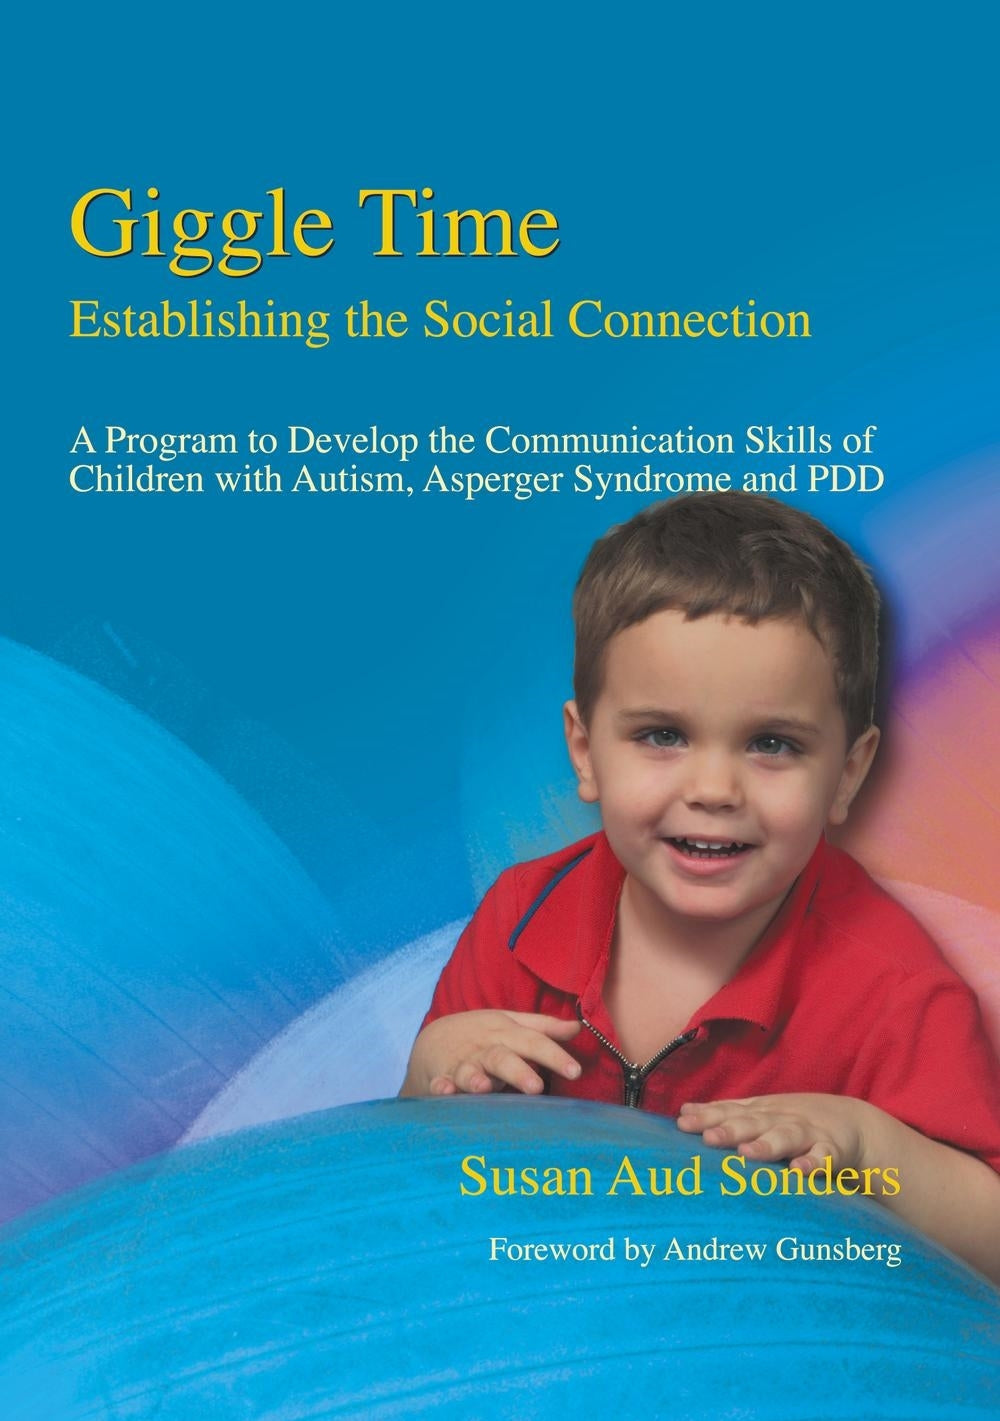 Giggle Time - Establishing the Social Connection by Susan Aud Sonders